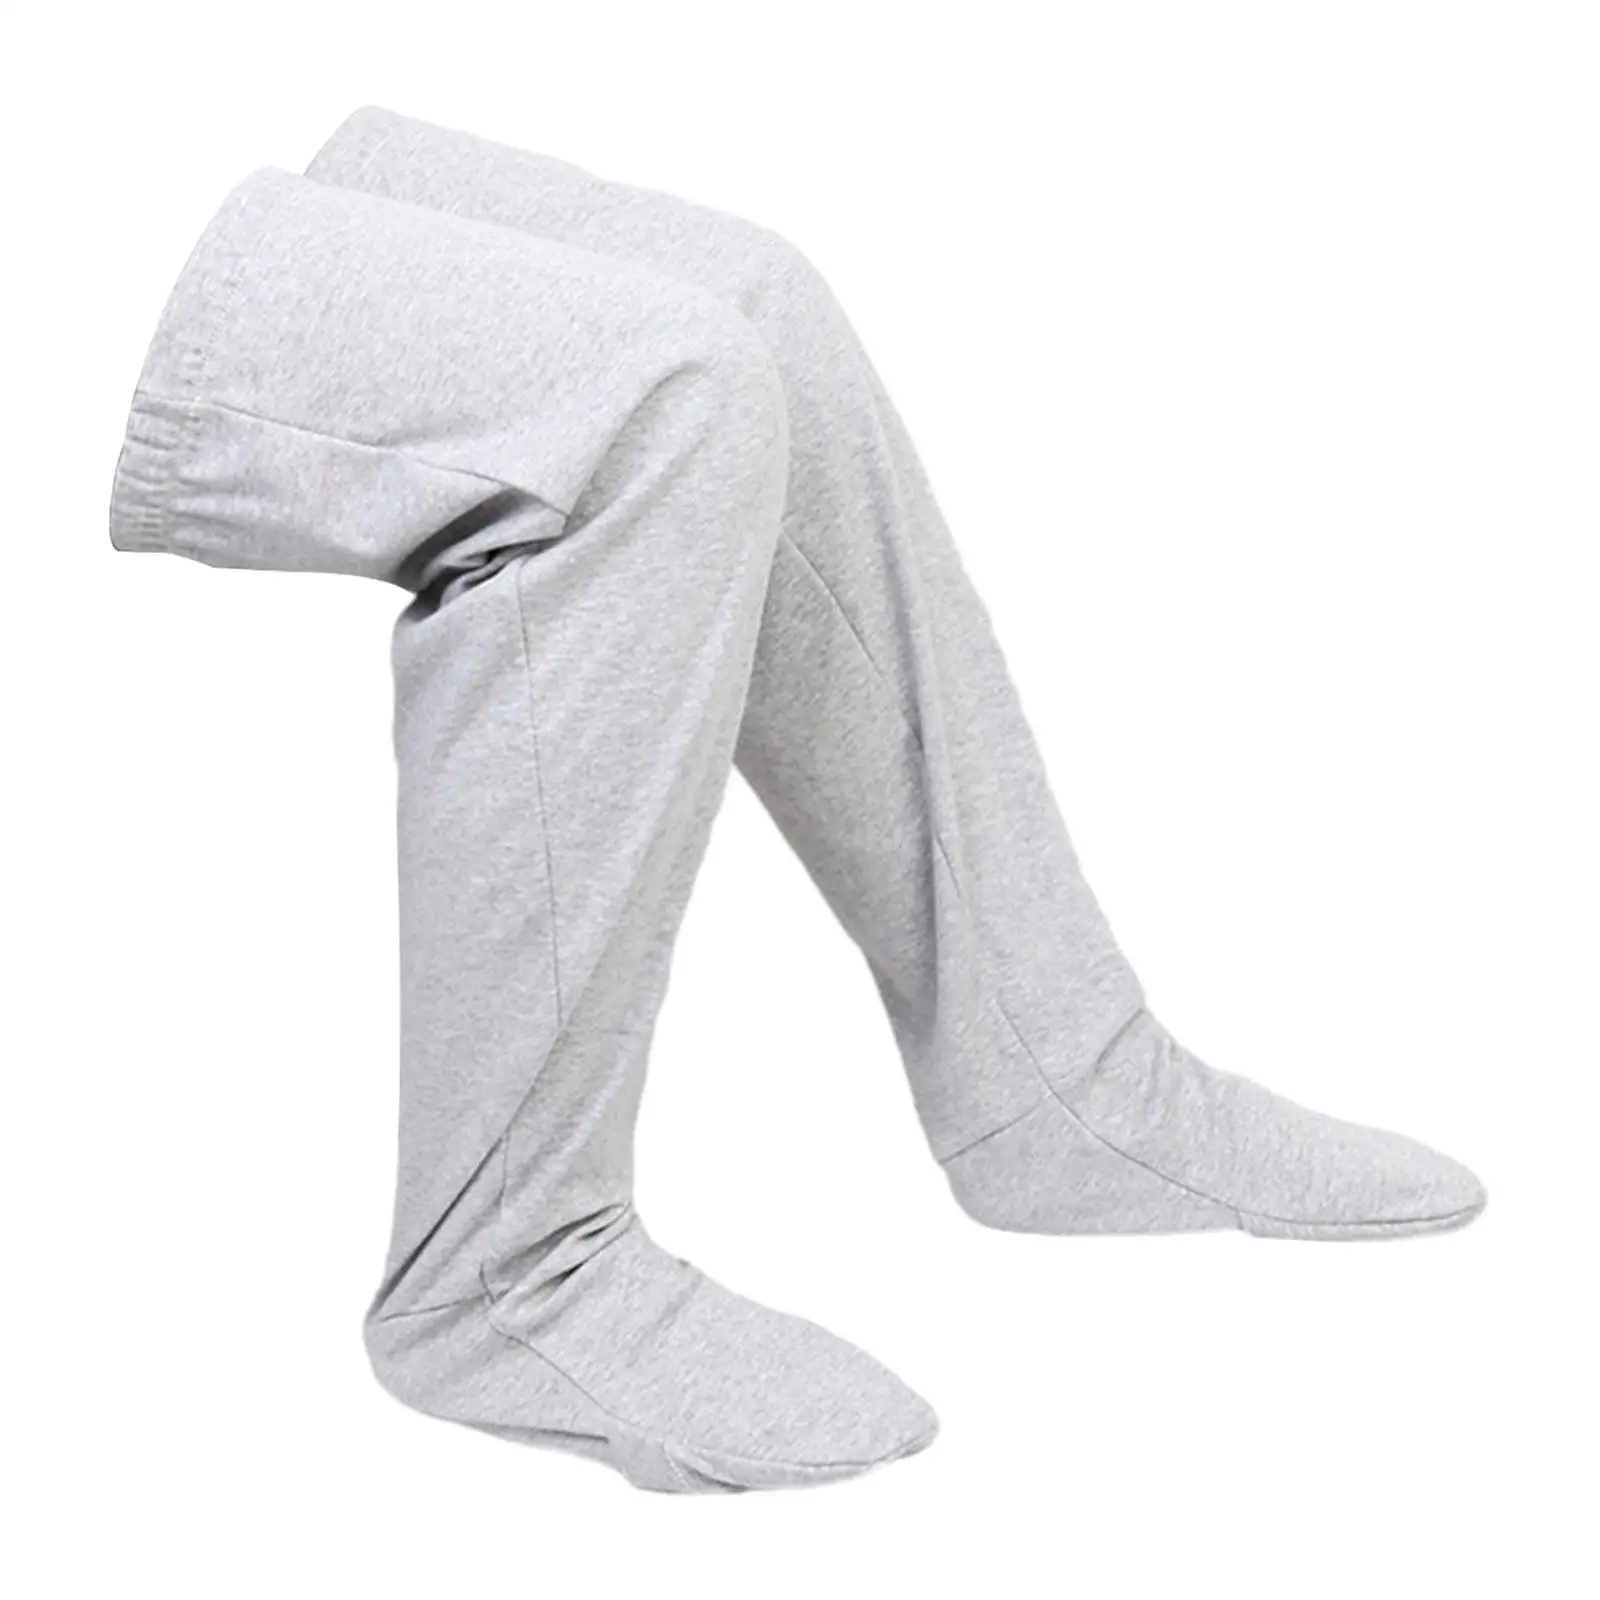 Sleep Socks Elastic All Seasons Lightweight Foot Cover for Air Conditioned Rooms Women Men The Aged Father Mother Apartment